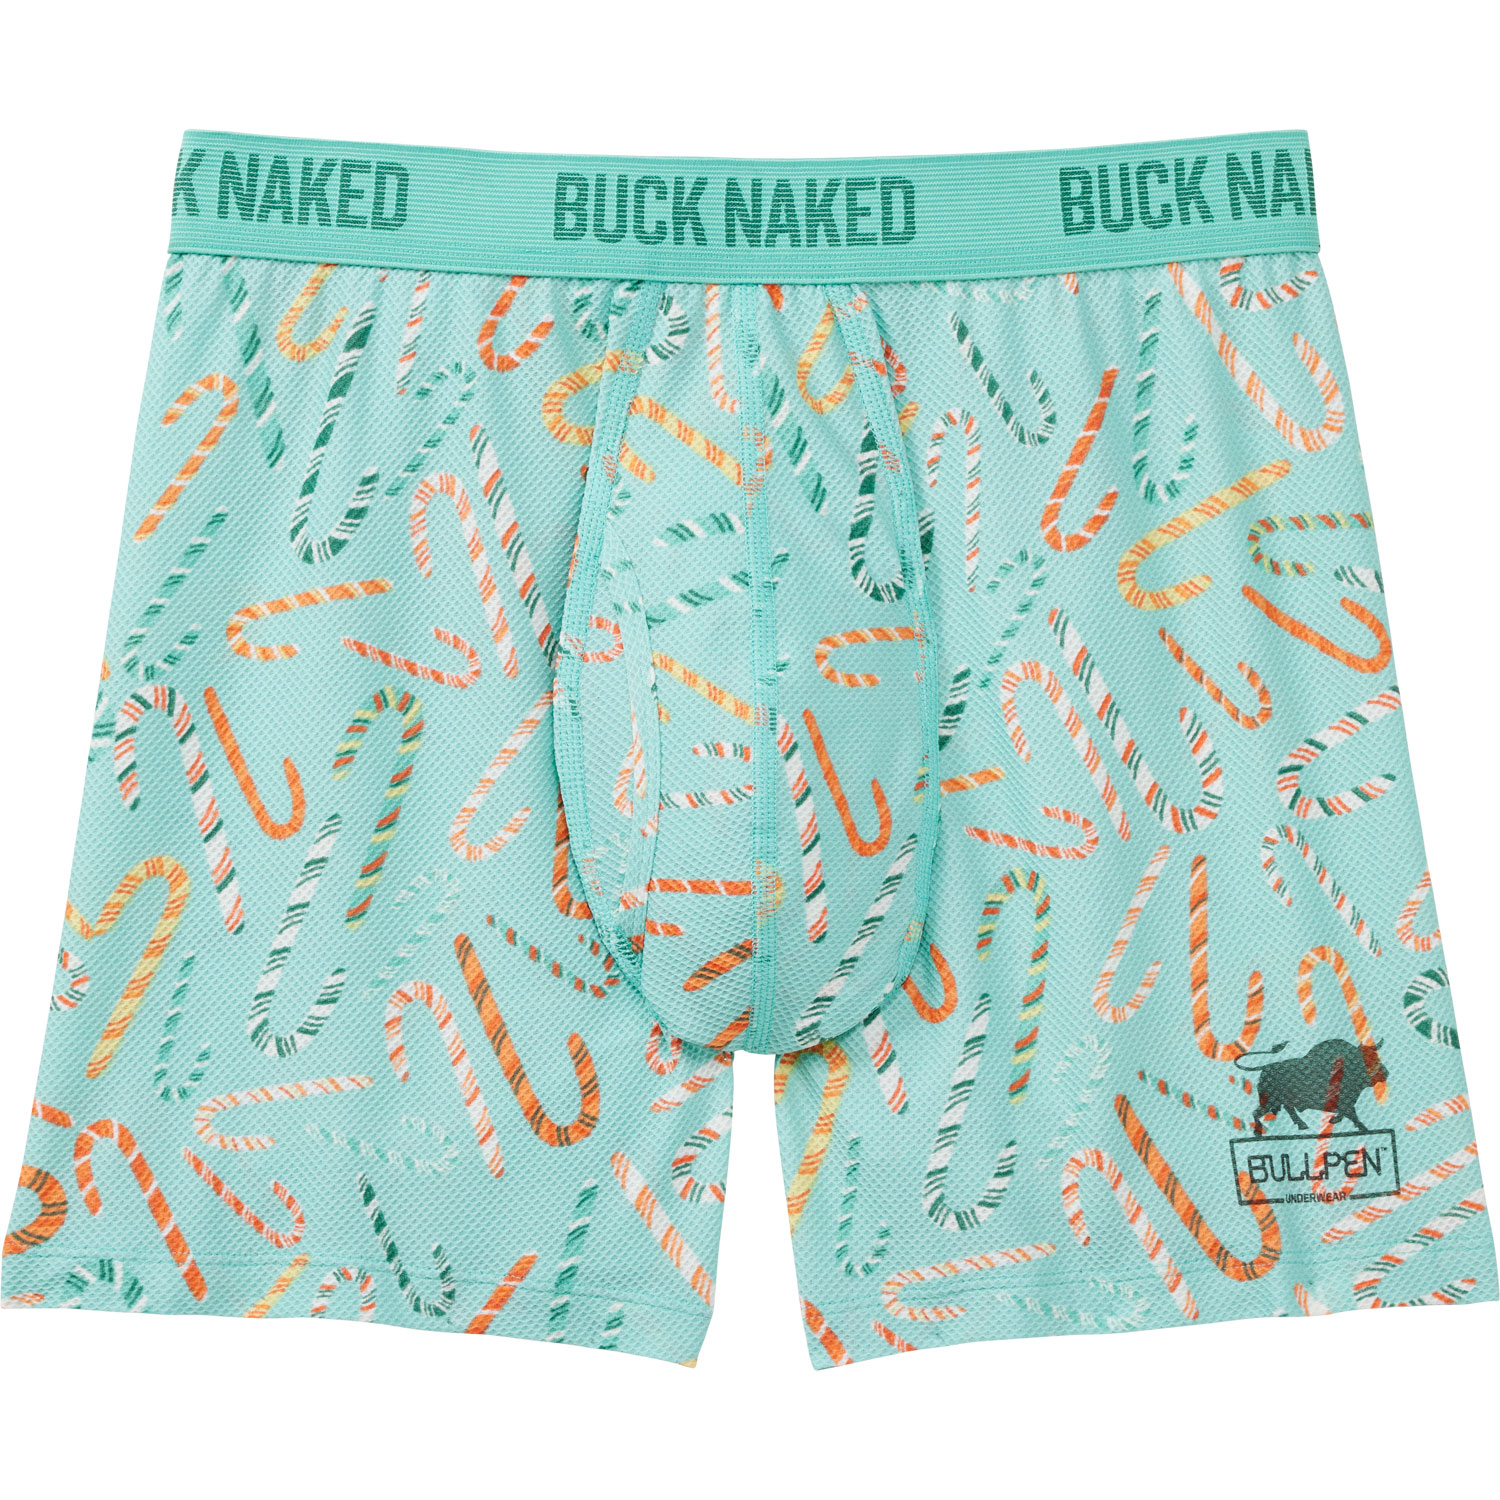 1 Pr Duluth Trading Buck Naked Boxer Briefs Spread the Peanut